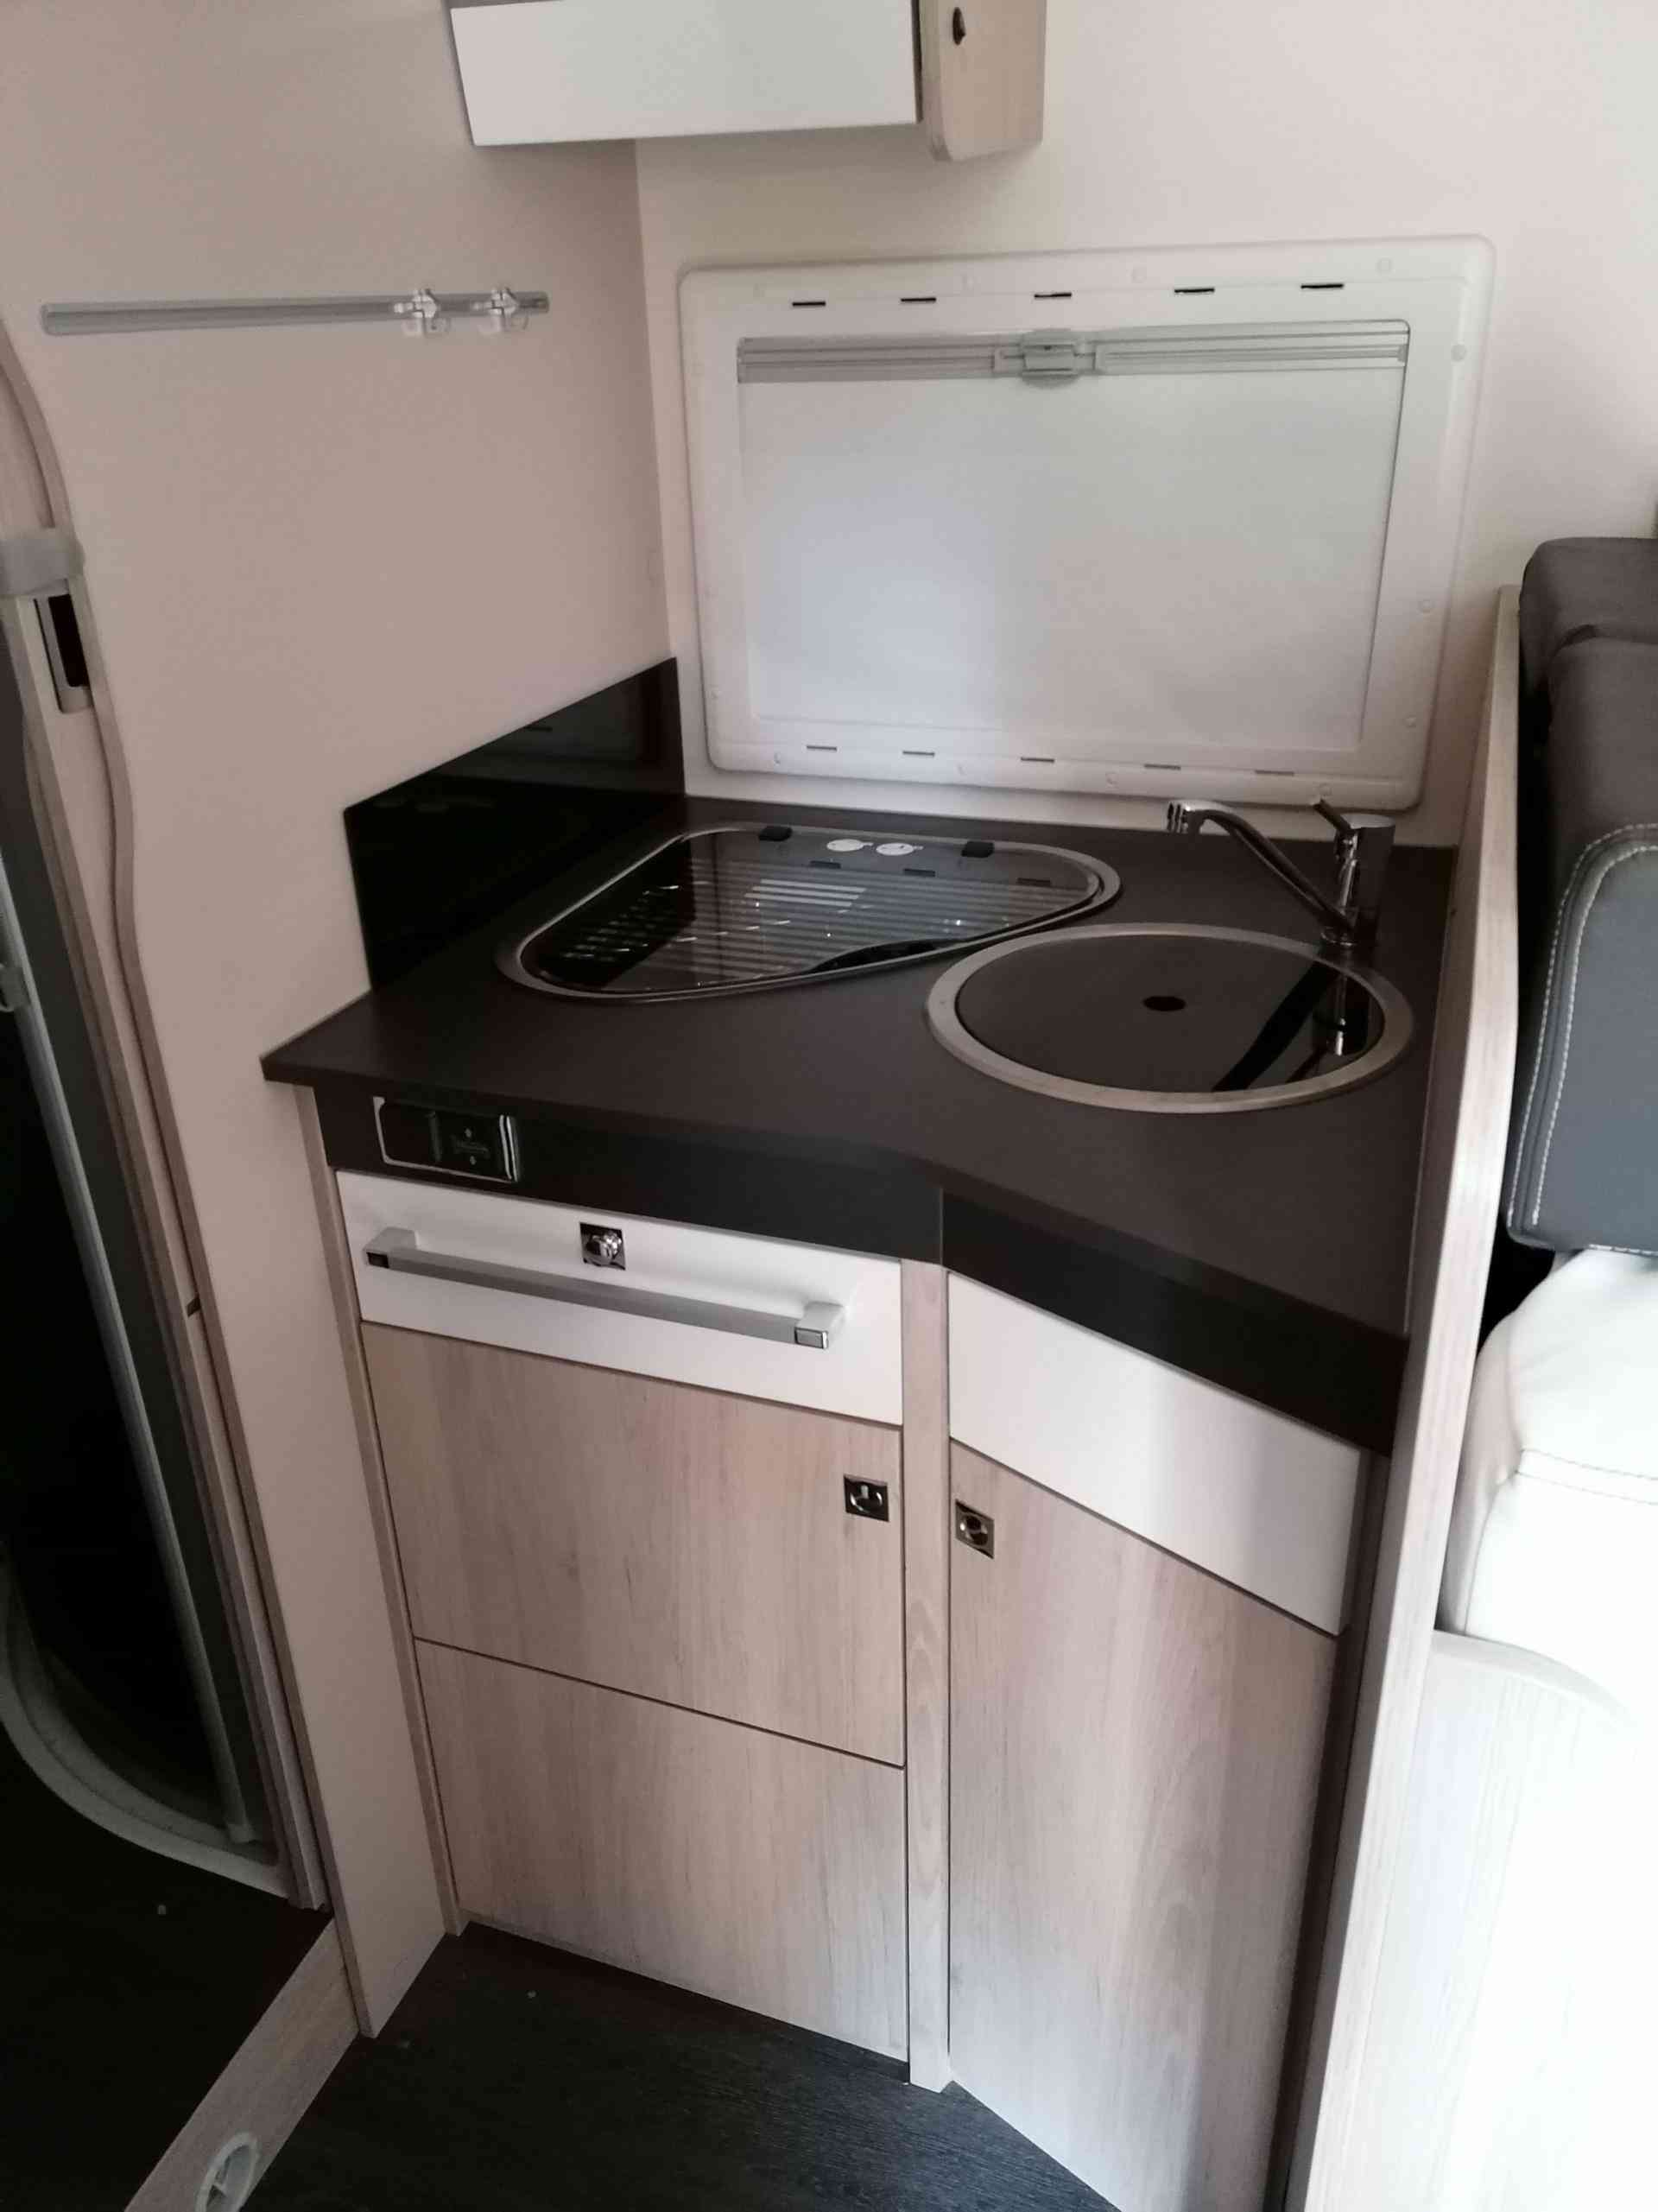 camping-car CHAUSSON 628 EB EDITION SPECIALE 